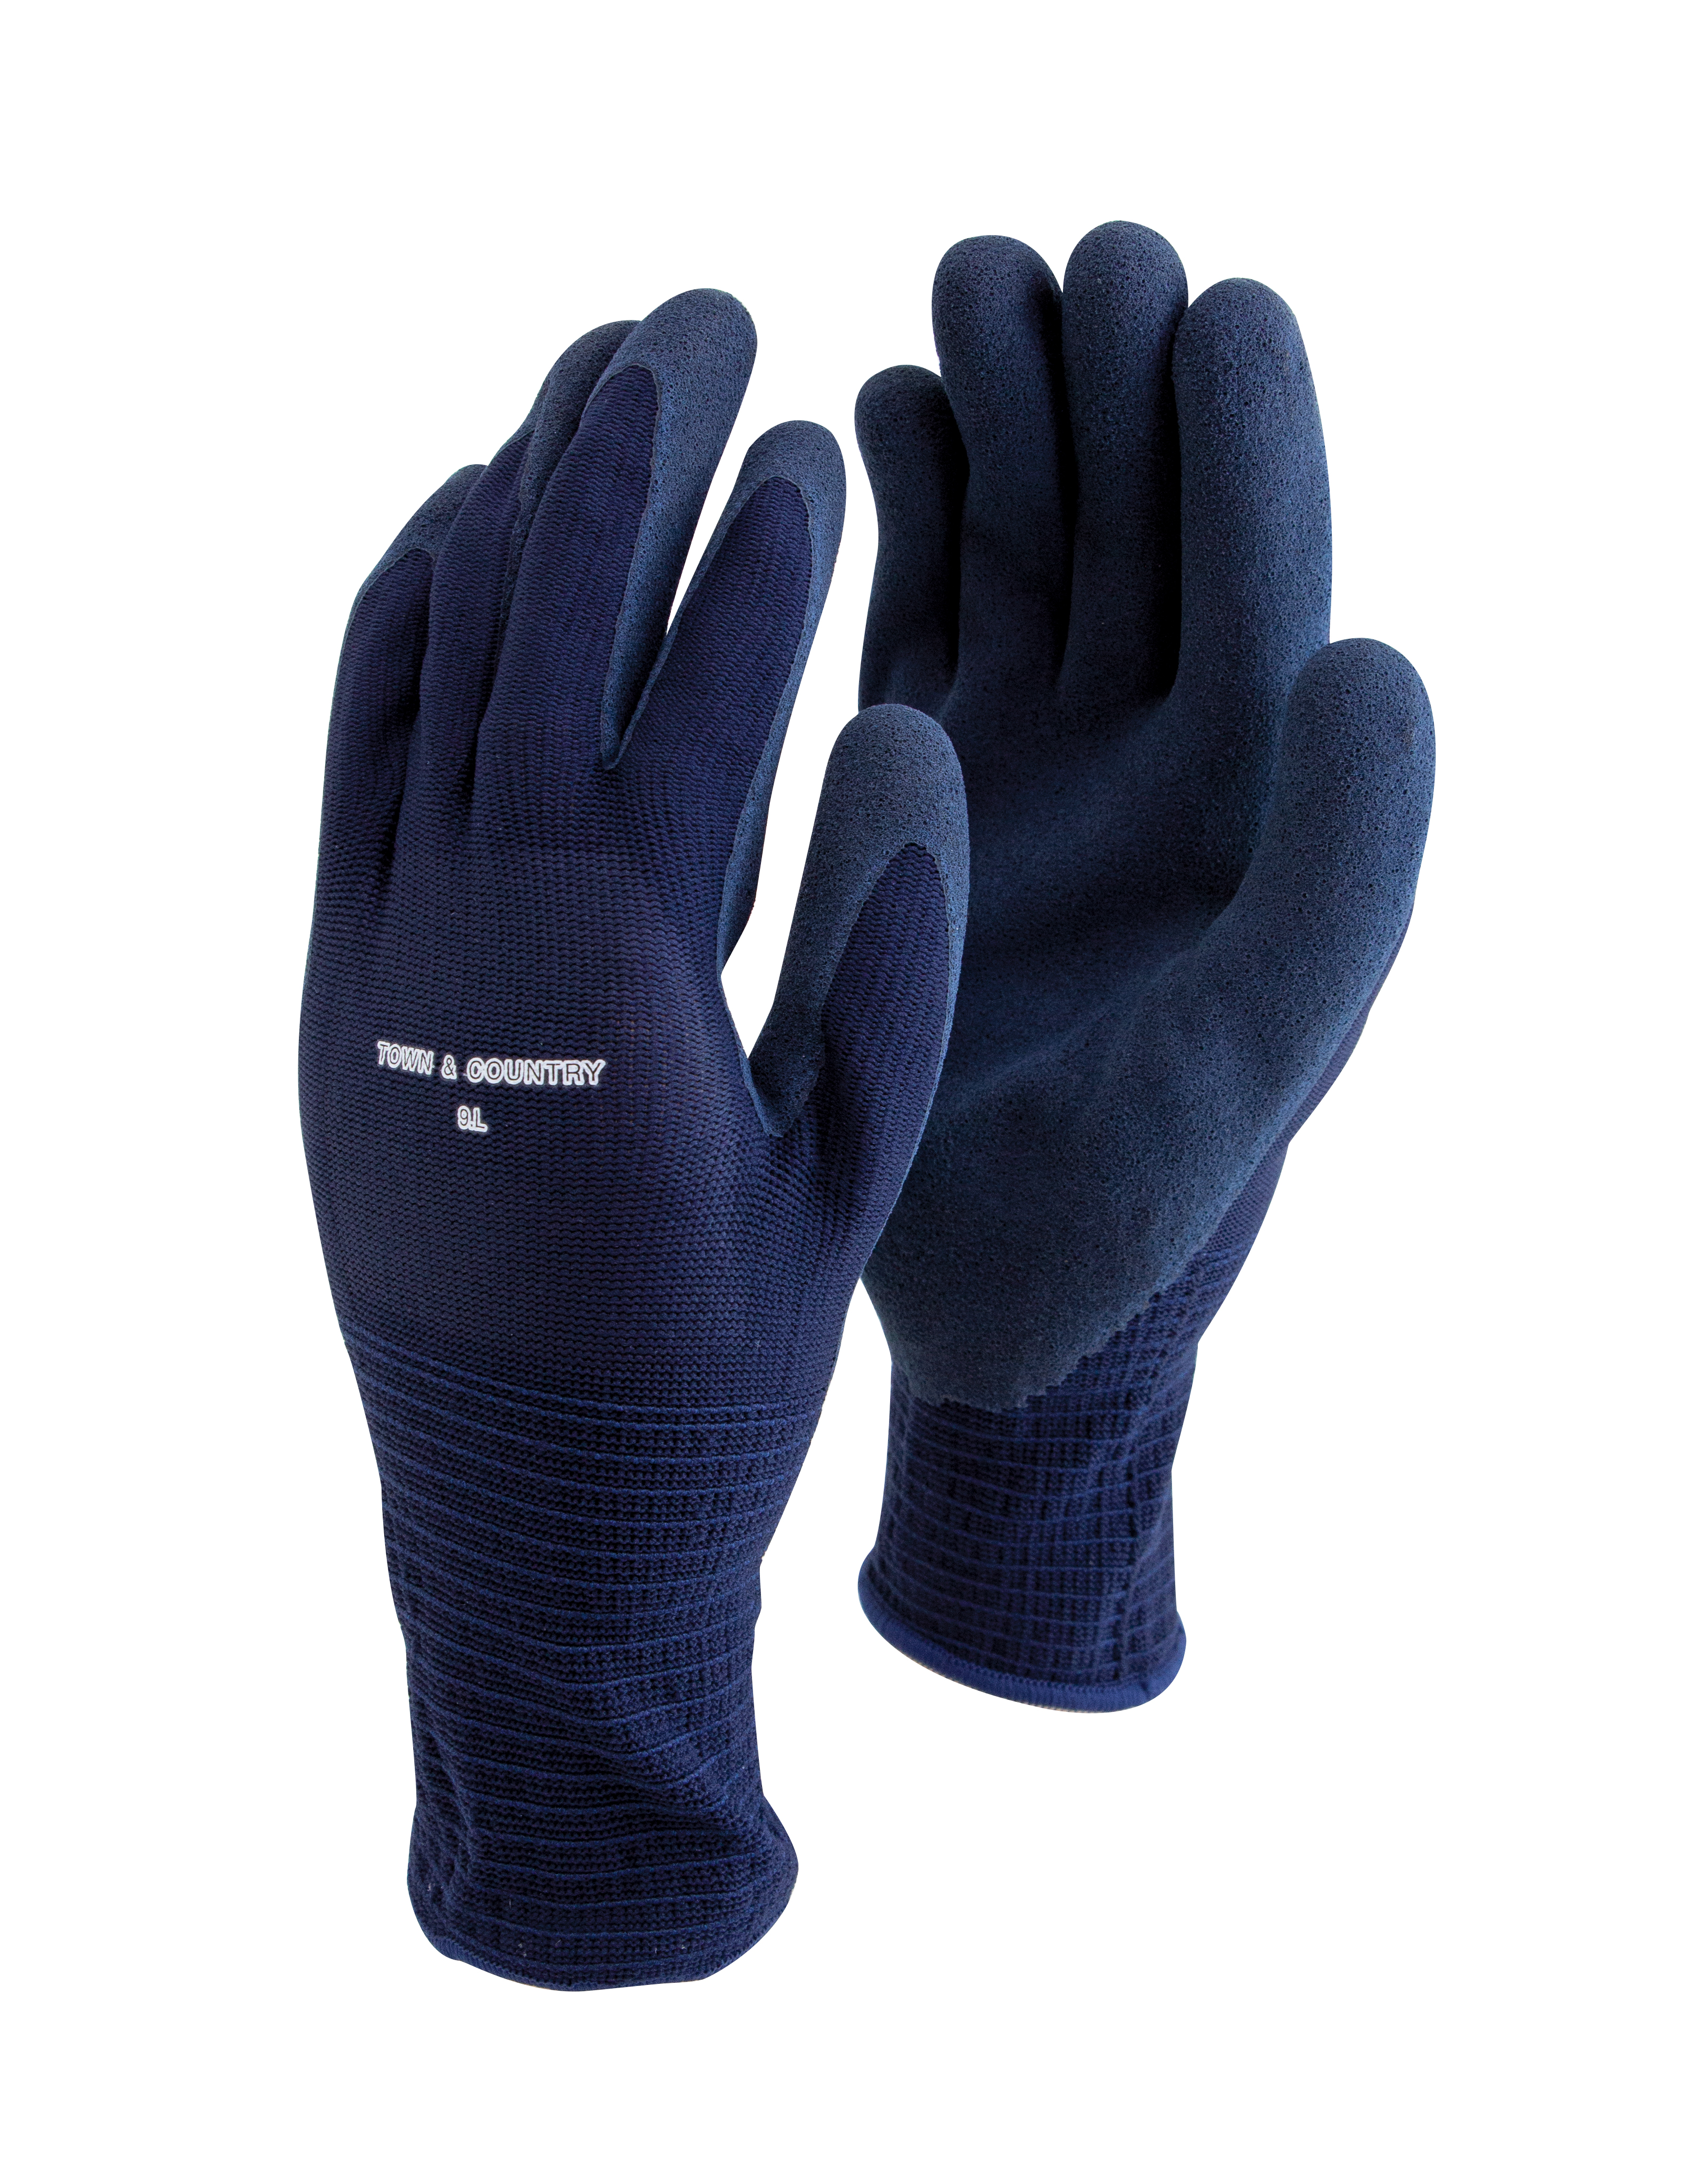 Navy Blue #40B251 Large Town and Country Master Gardener Gardening Gloves 